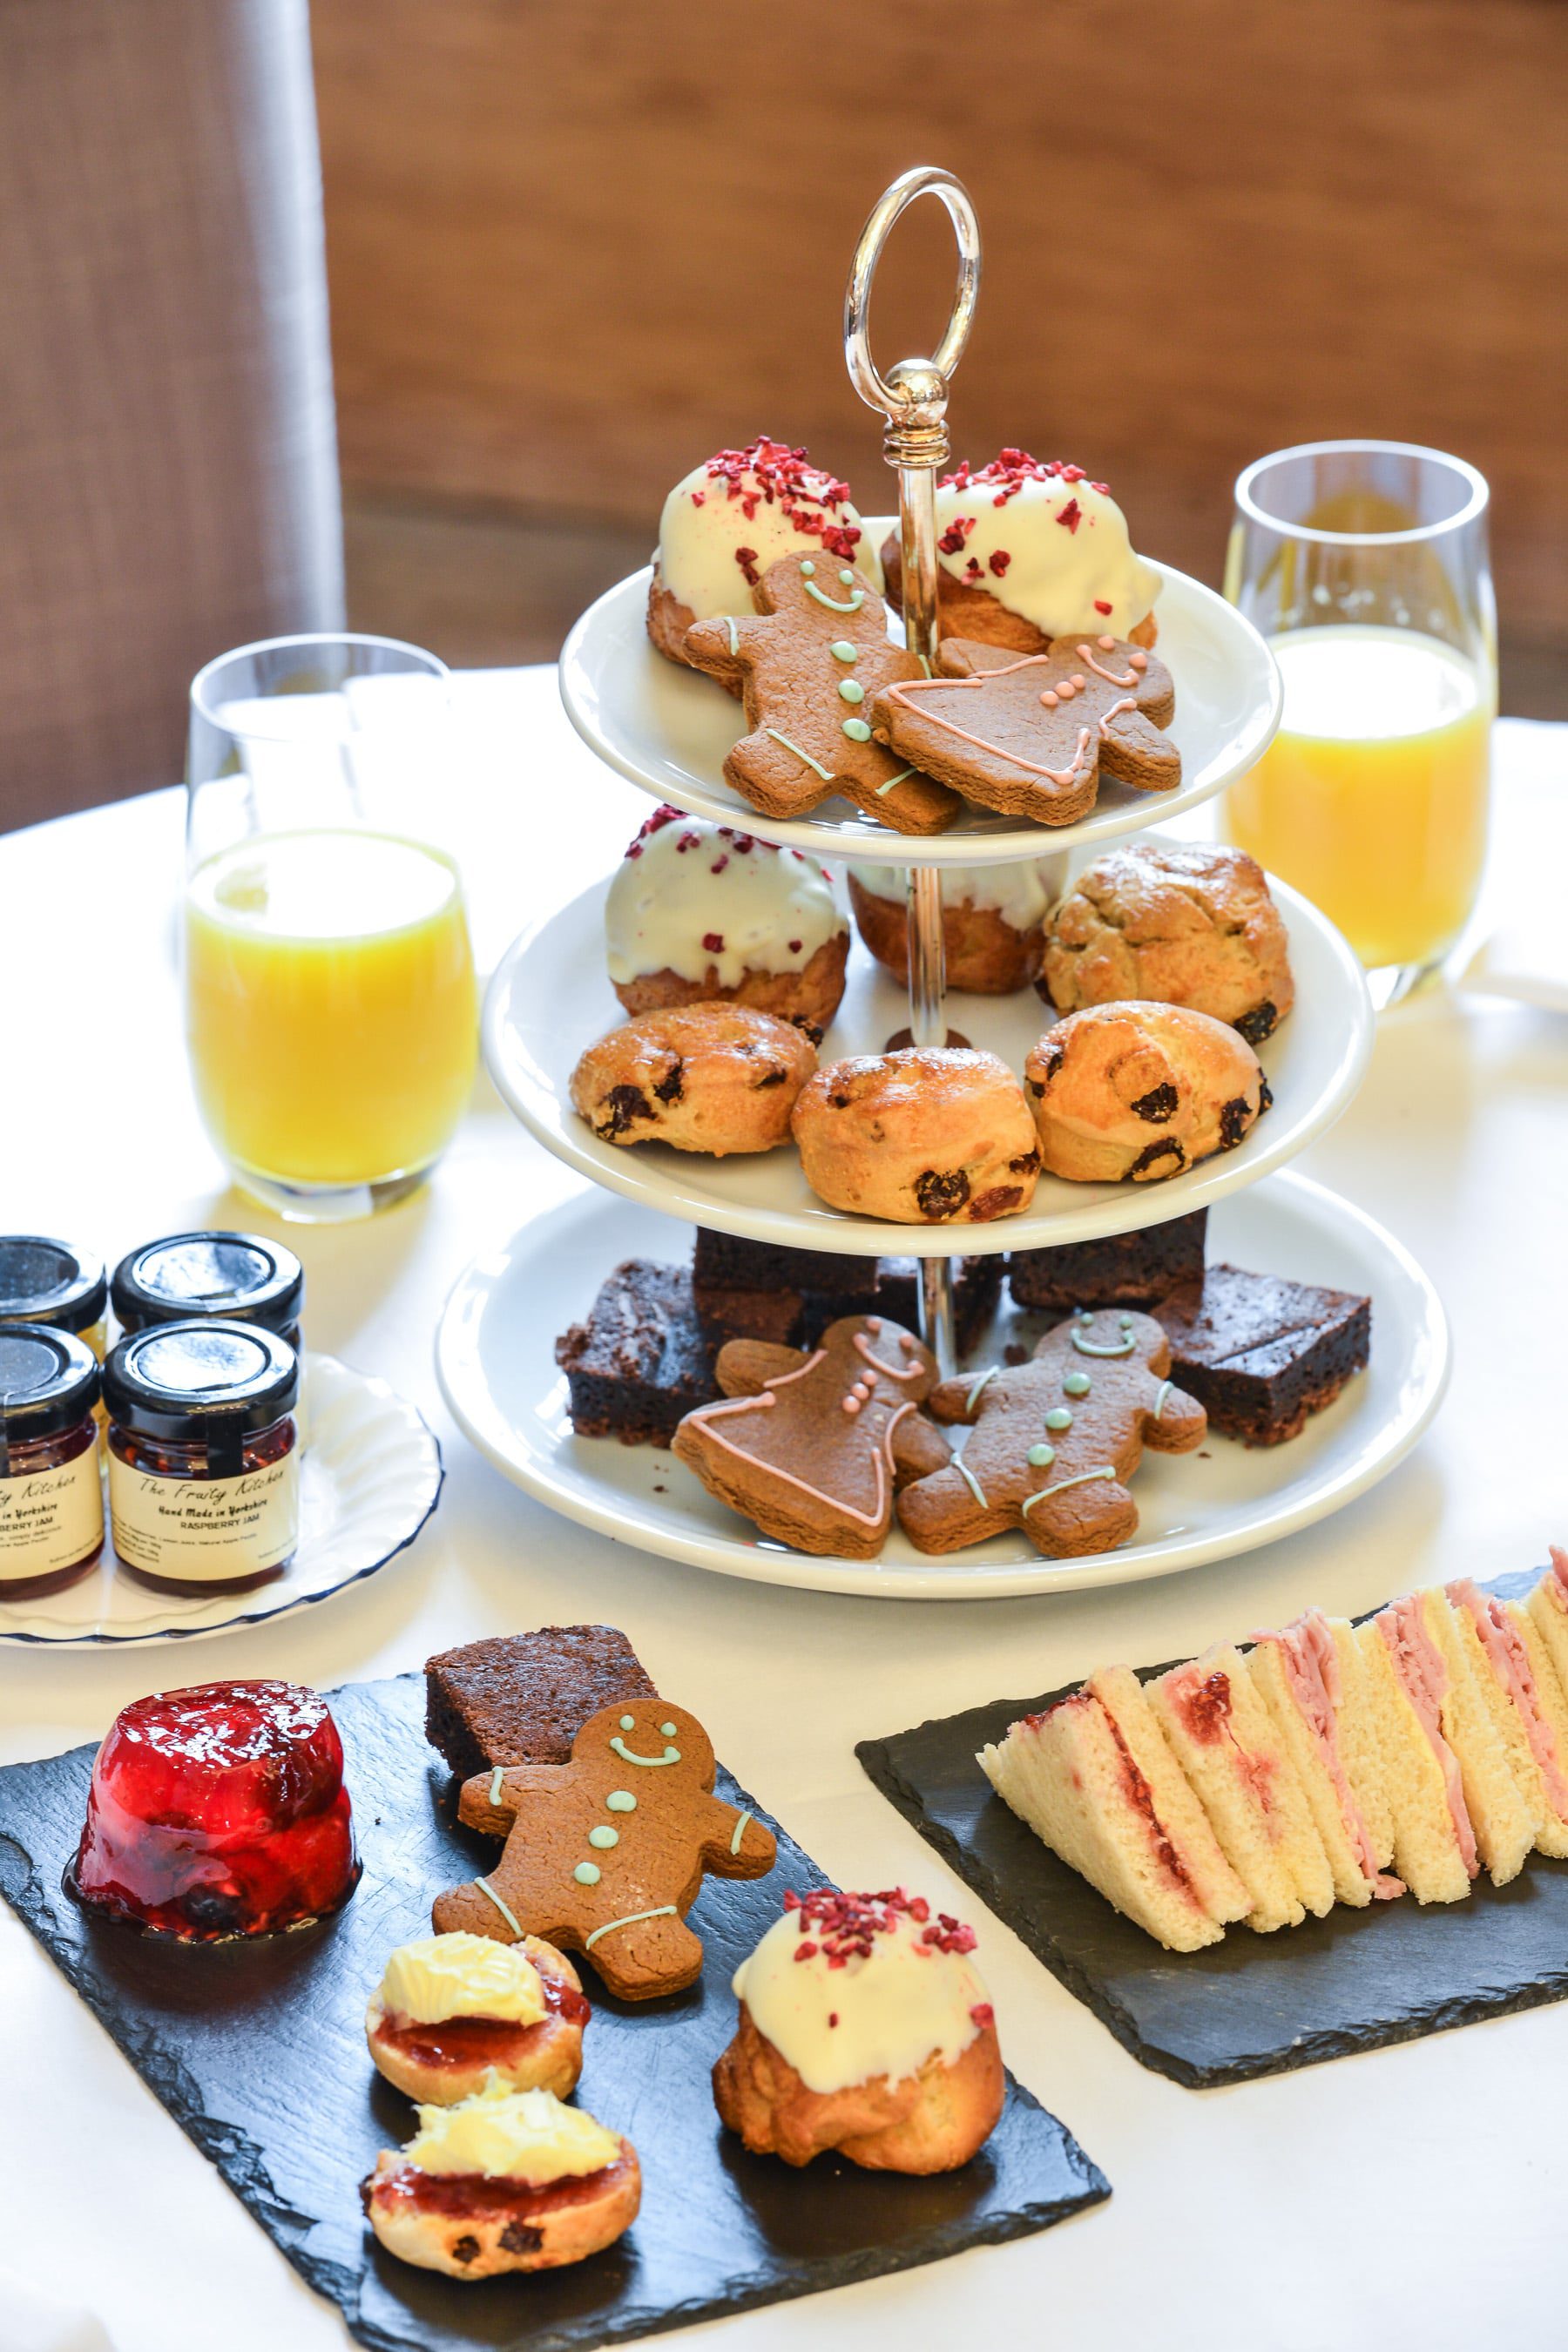 The children's afternoon tea is a must try at The Grand Hotel and Spa, York